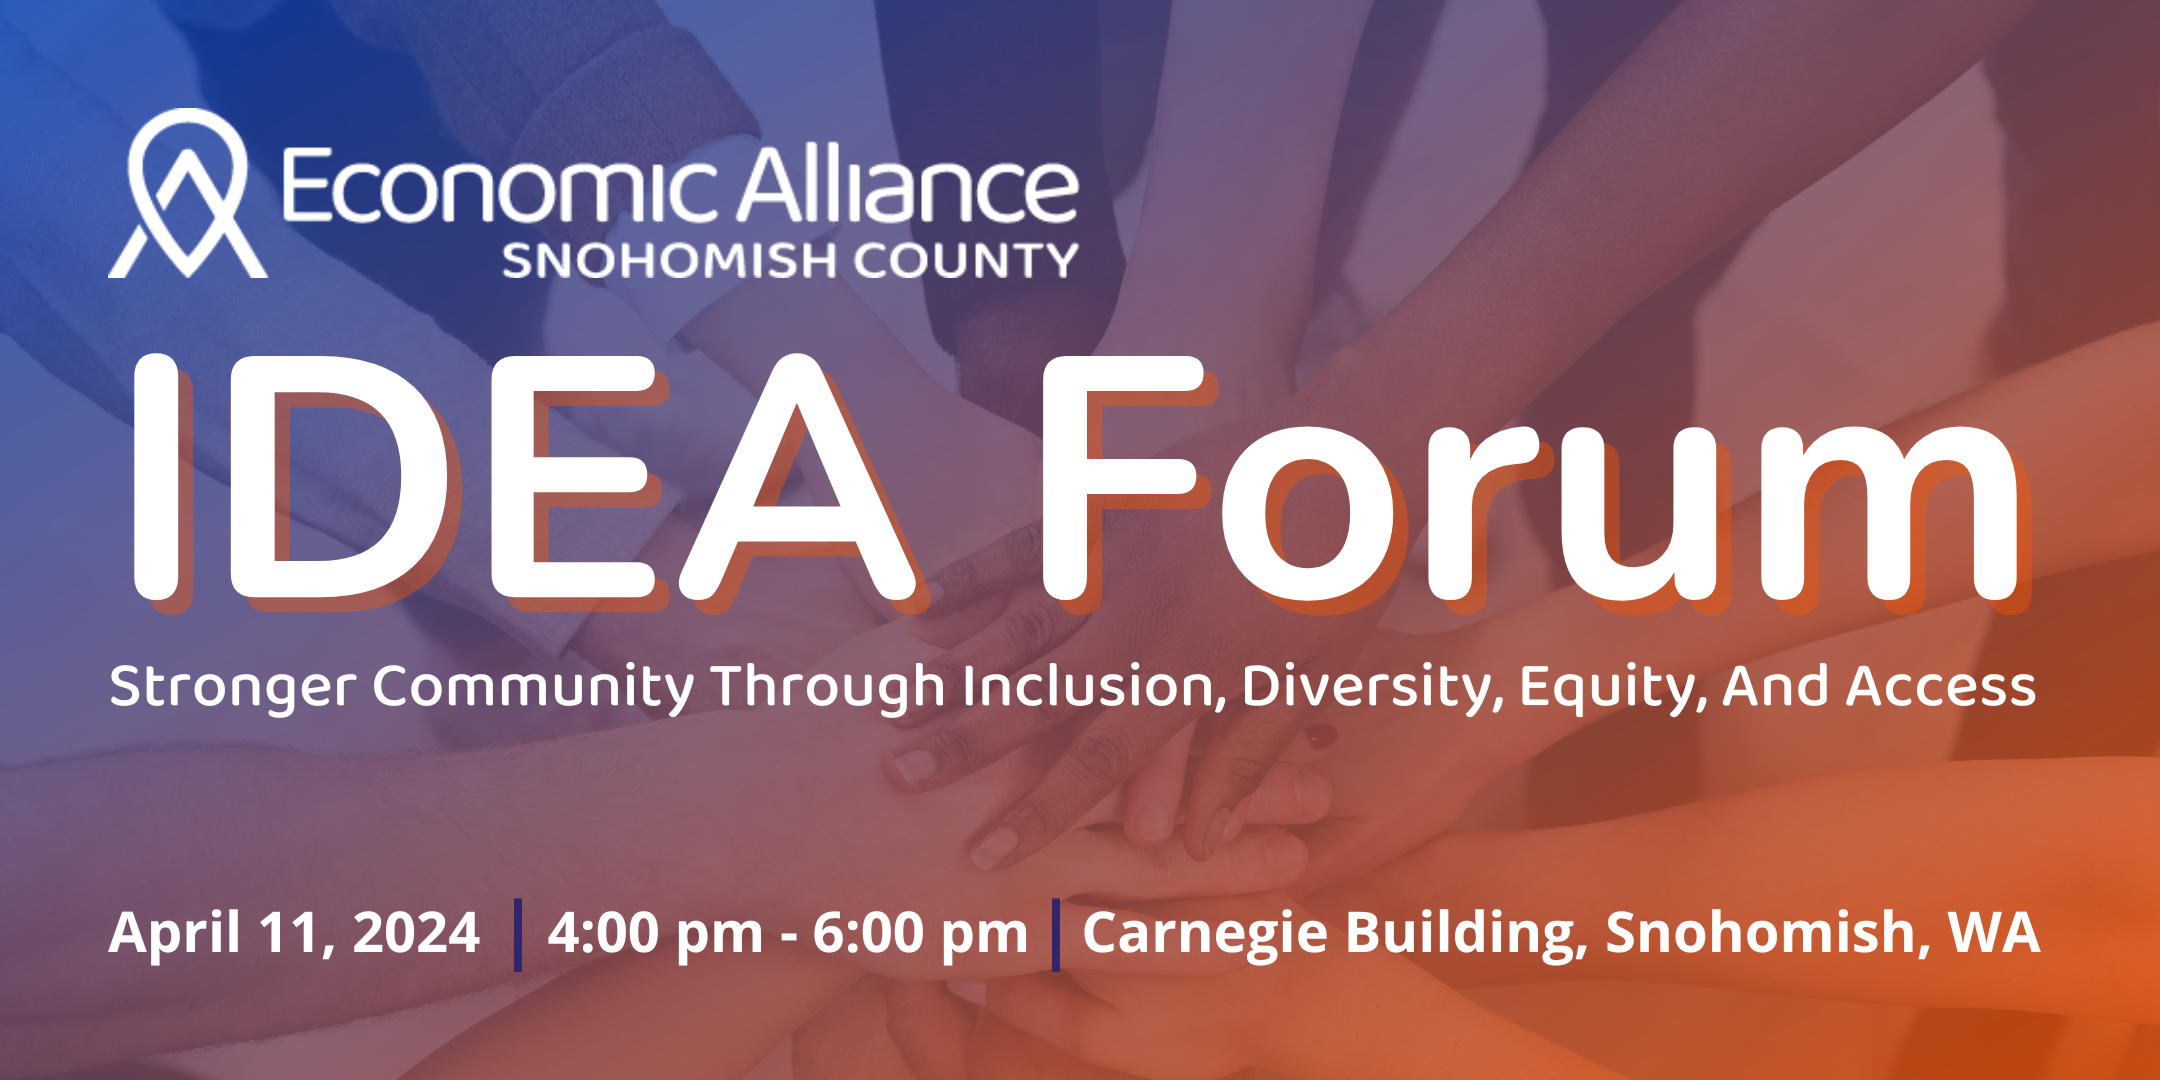 Event Promo Photo For IDEA Forum (Inclusion, Diversity, Equity, Accessibility)